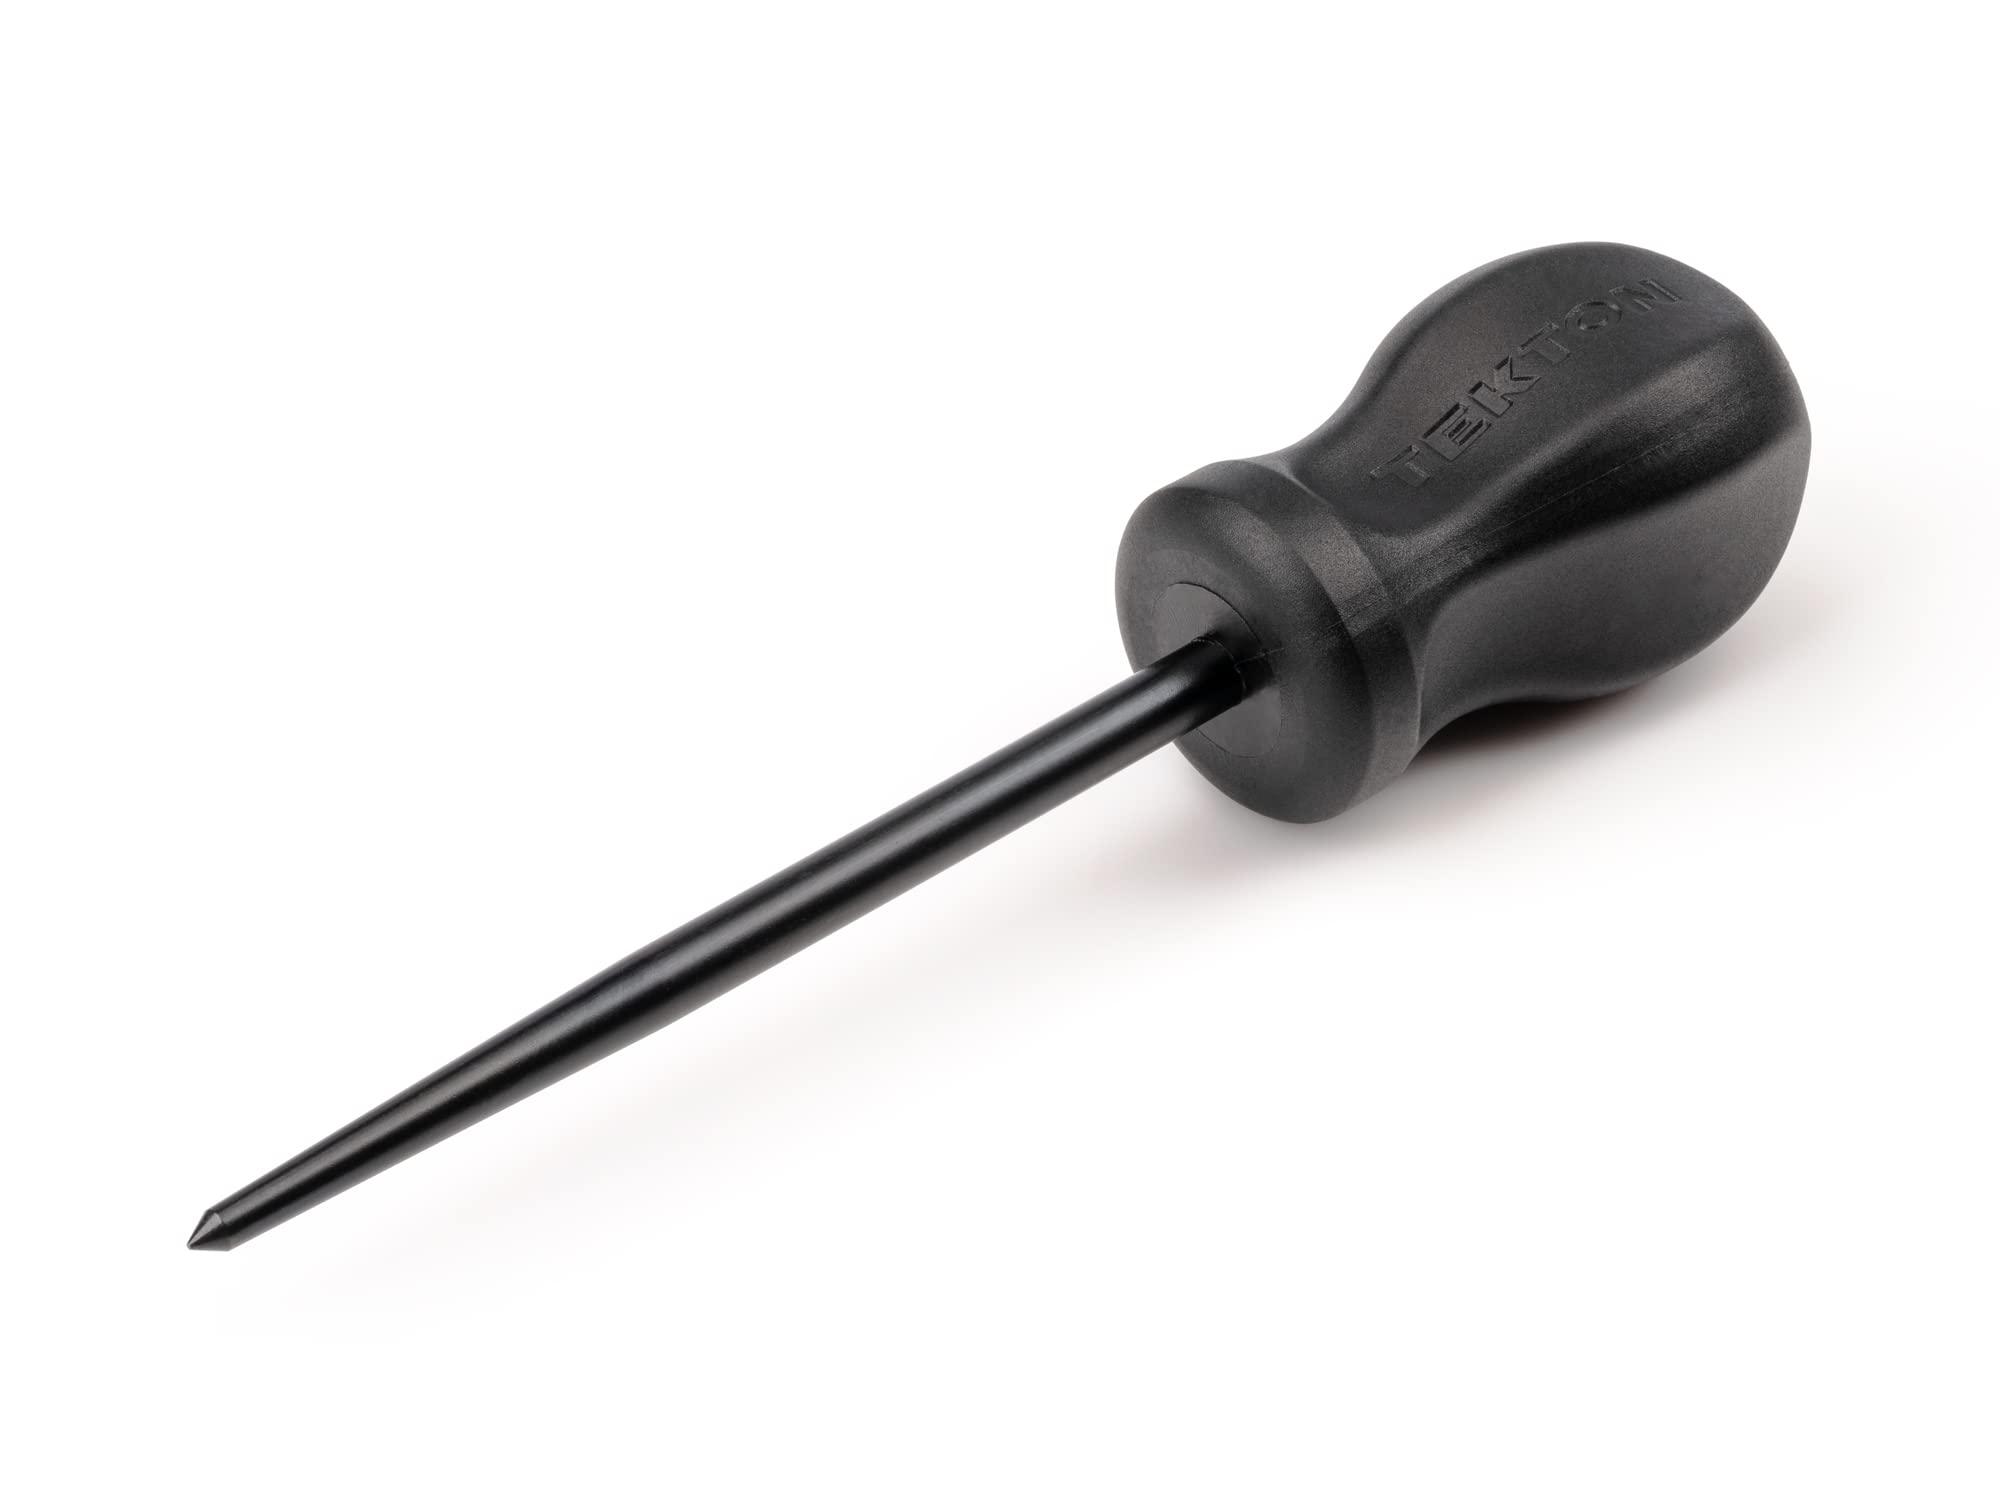 tekton scratch and punch awl with hard handle, pnh21106